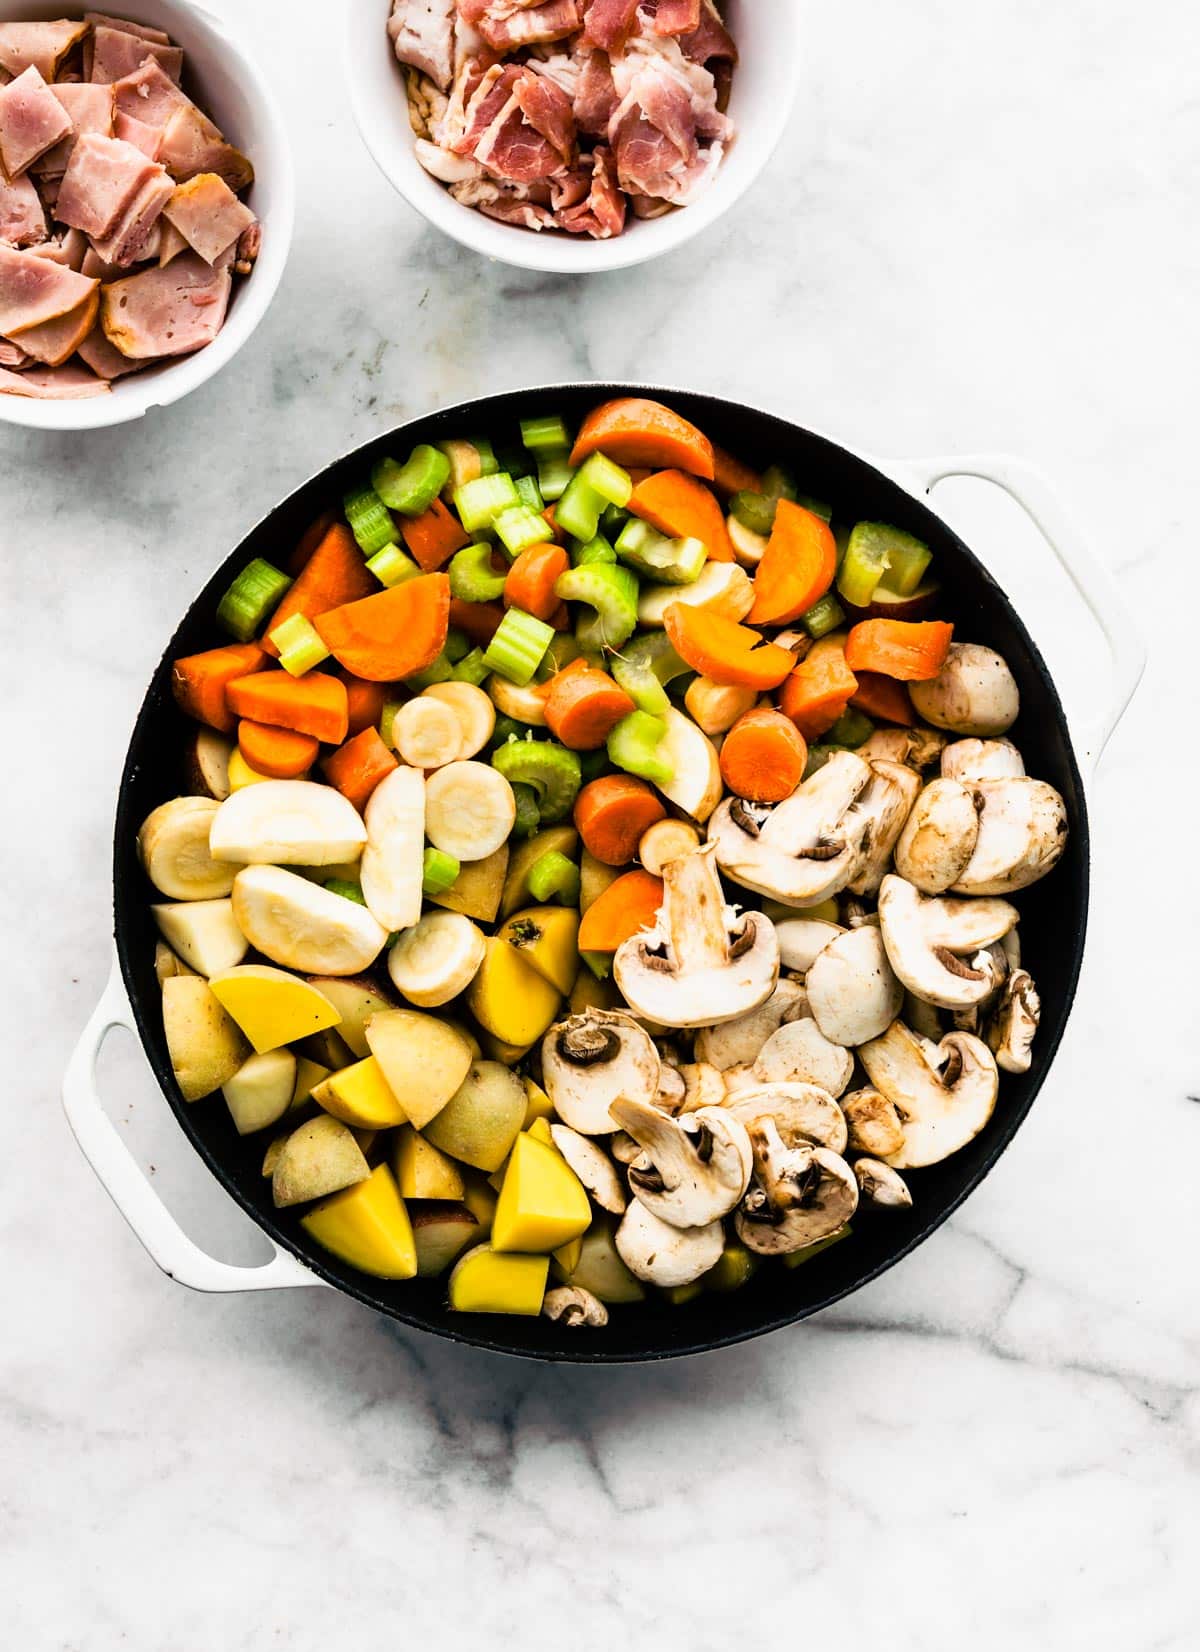 Chopped potatoes, carrots, celery, and mushrooms in a pot